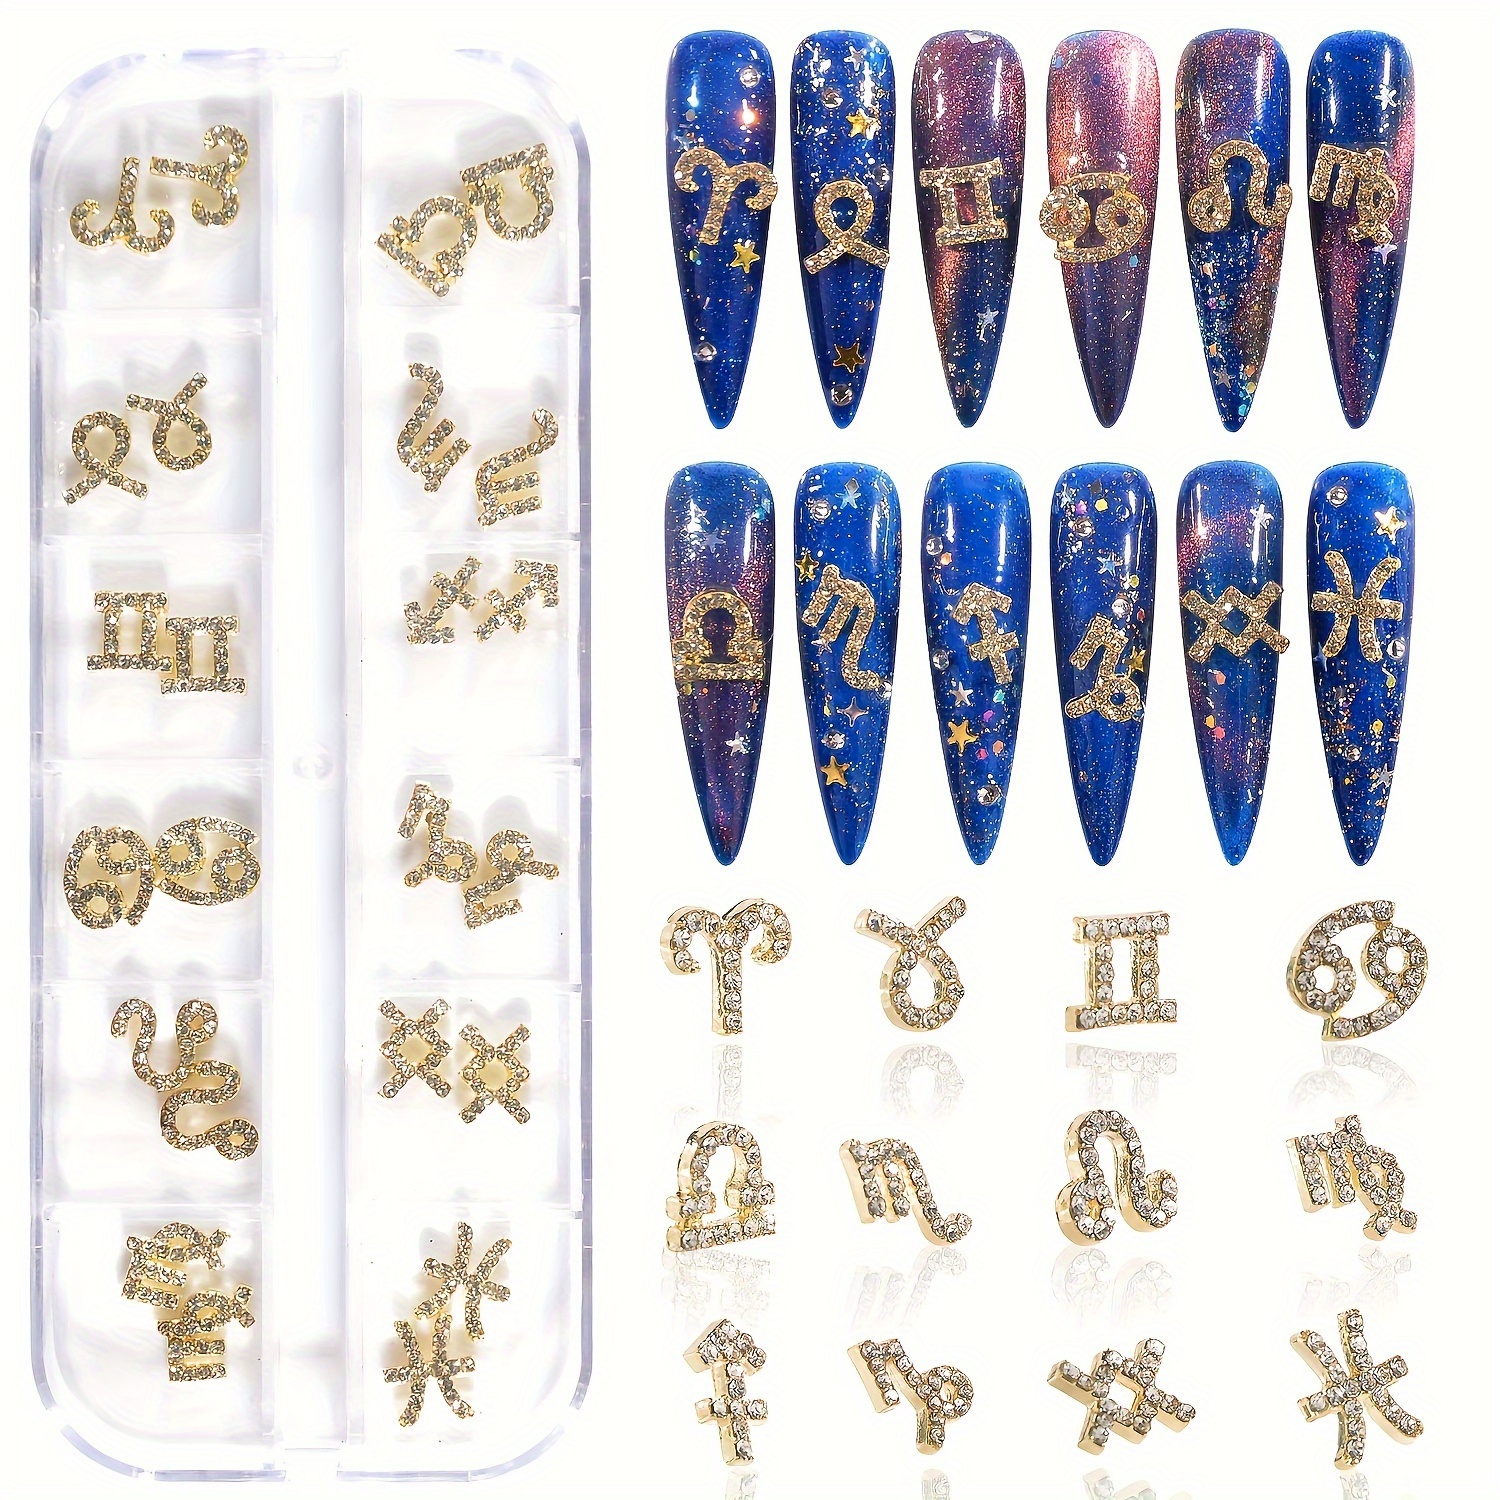 

24-piece Metallic Alloy Zodiac Nail Charms Set With Rhinestones - Sparkling Constellation Designs For Diy & Salon Manicure Accessories